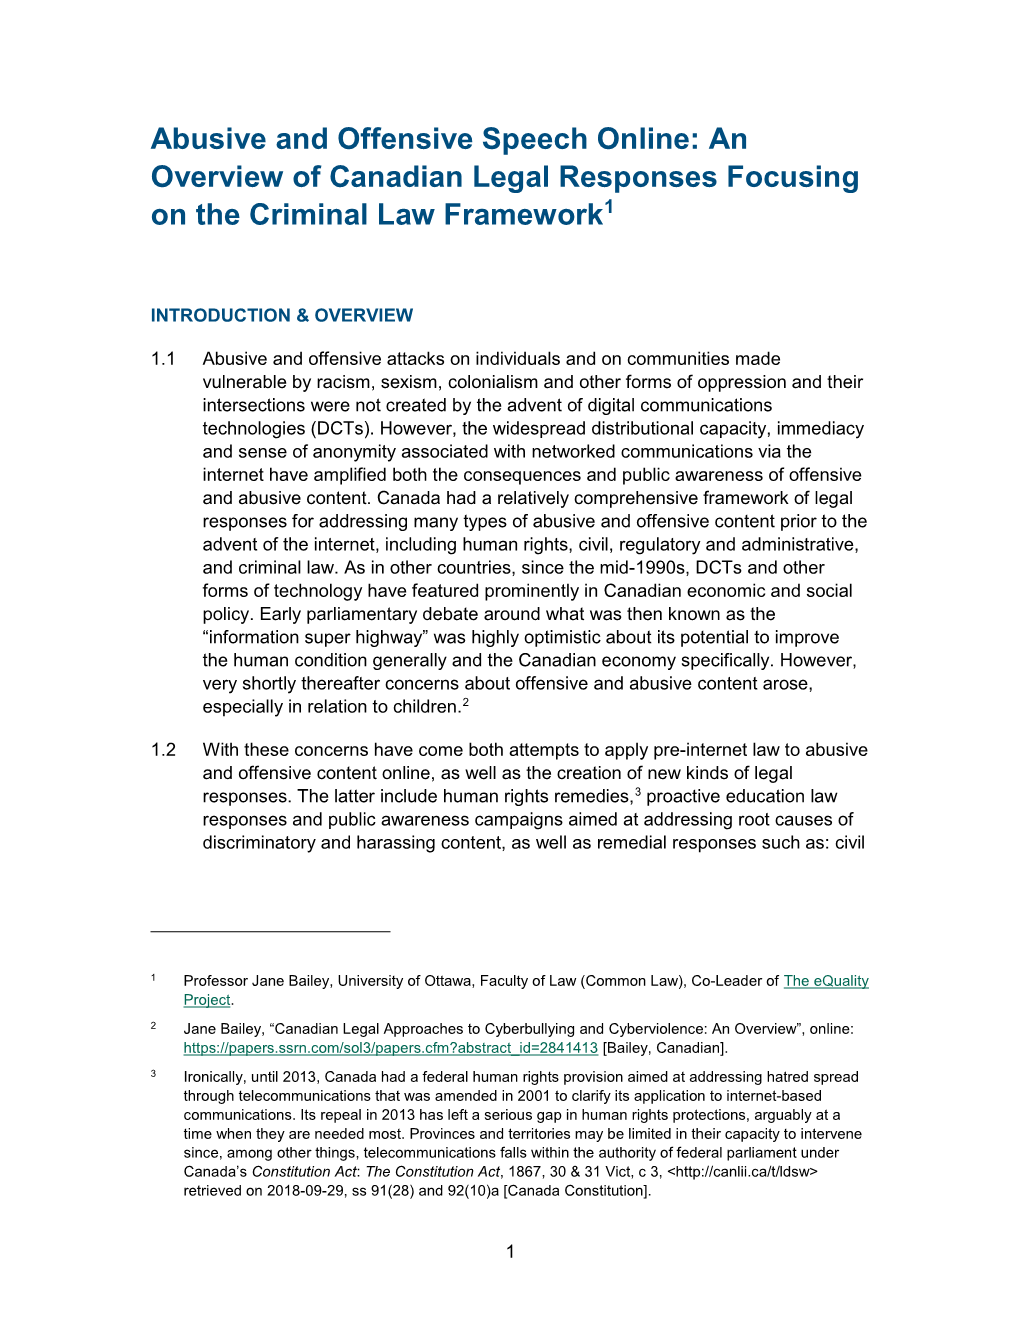 Abusive and Offensive Speech Online: an Overview of Canadian Legal Responses Focusing on the Criminal Law Framework1